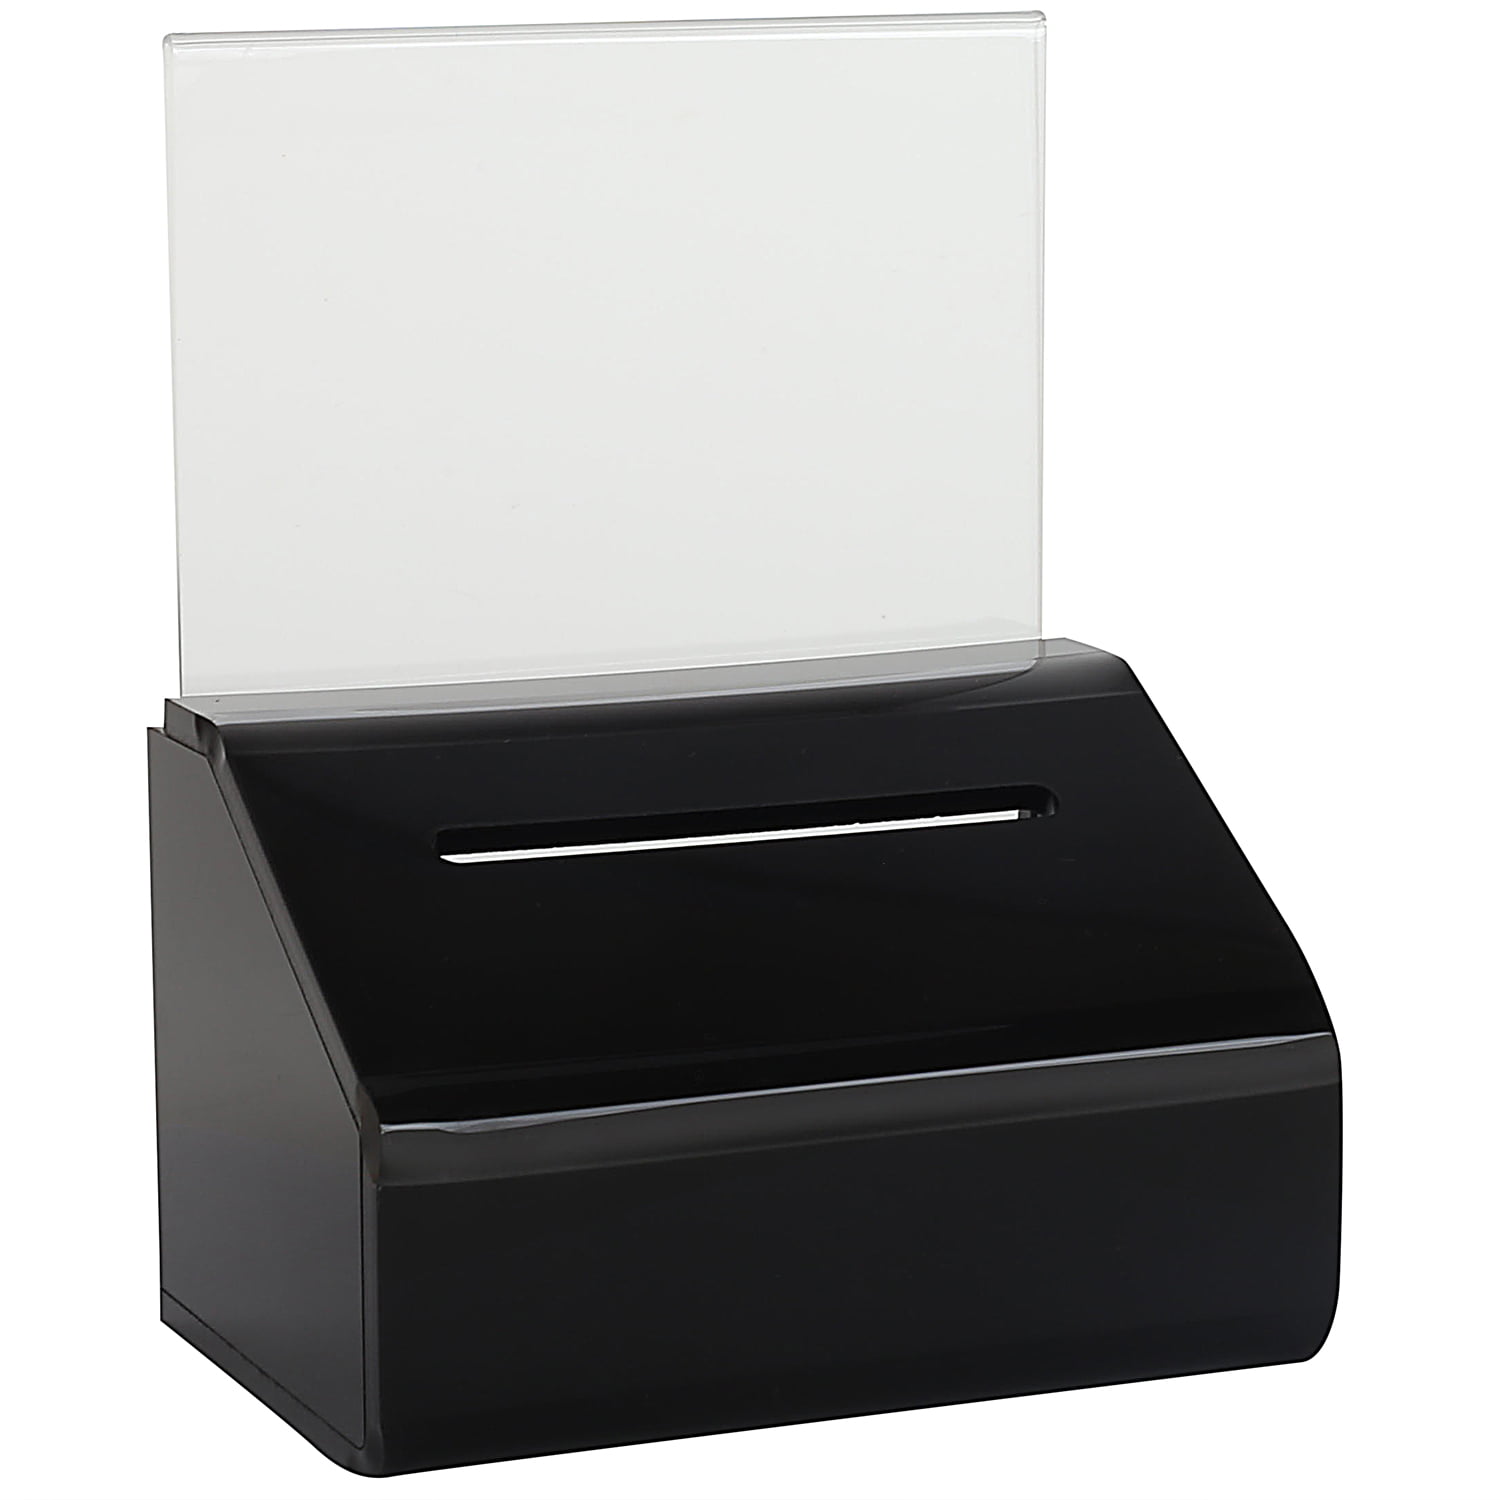 Ticket Box Black Collection Box - MCB Locked Donation Box with Back Wall Clear Display Area for Fundraising Donation Box 